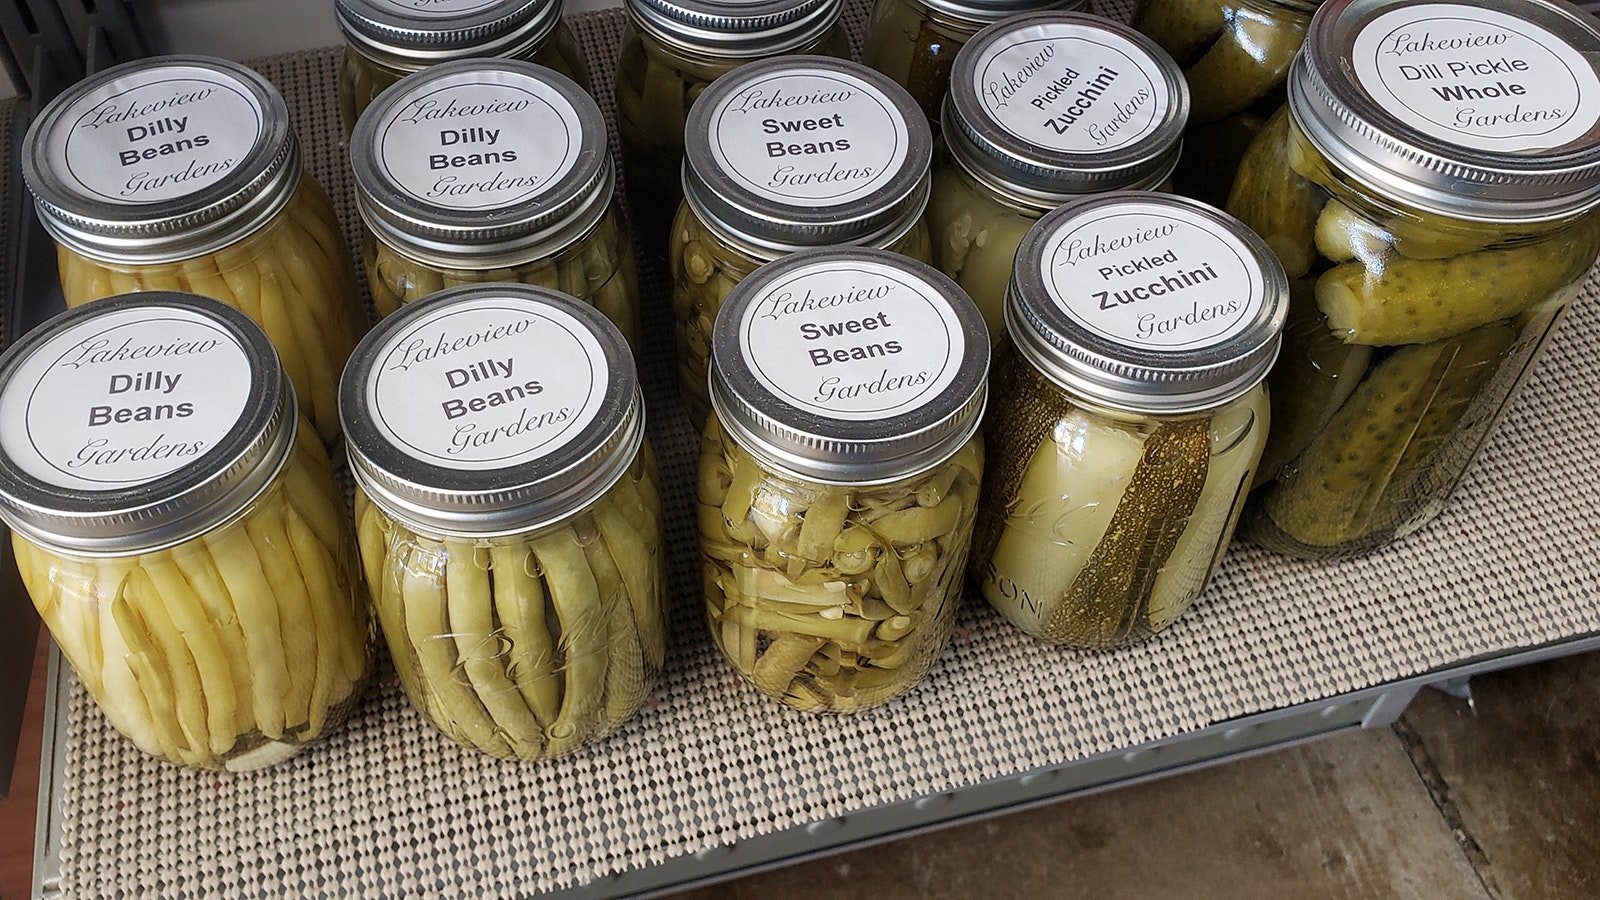 Lakeview Gardens has a year-round greenhouse and offers fresh produce year round as well a variety of pickles.